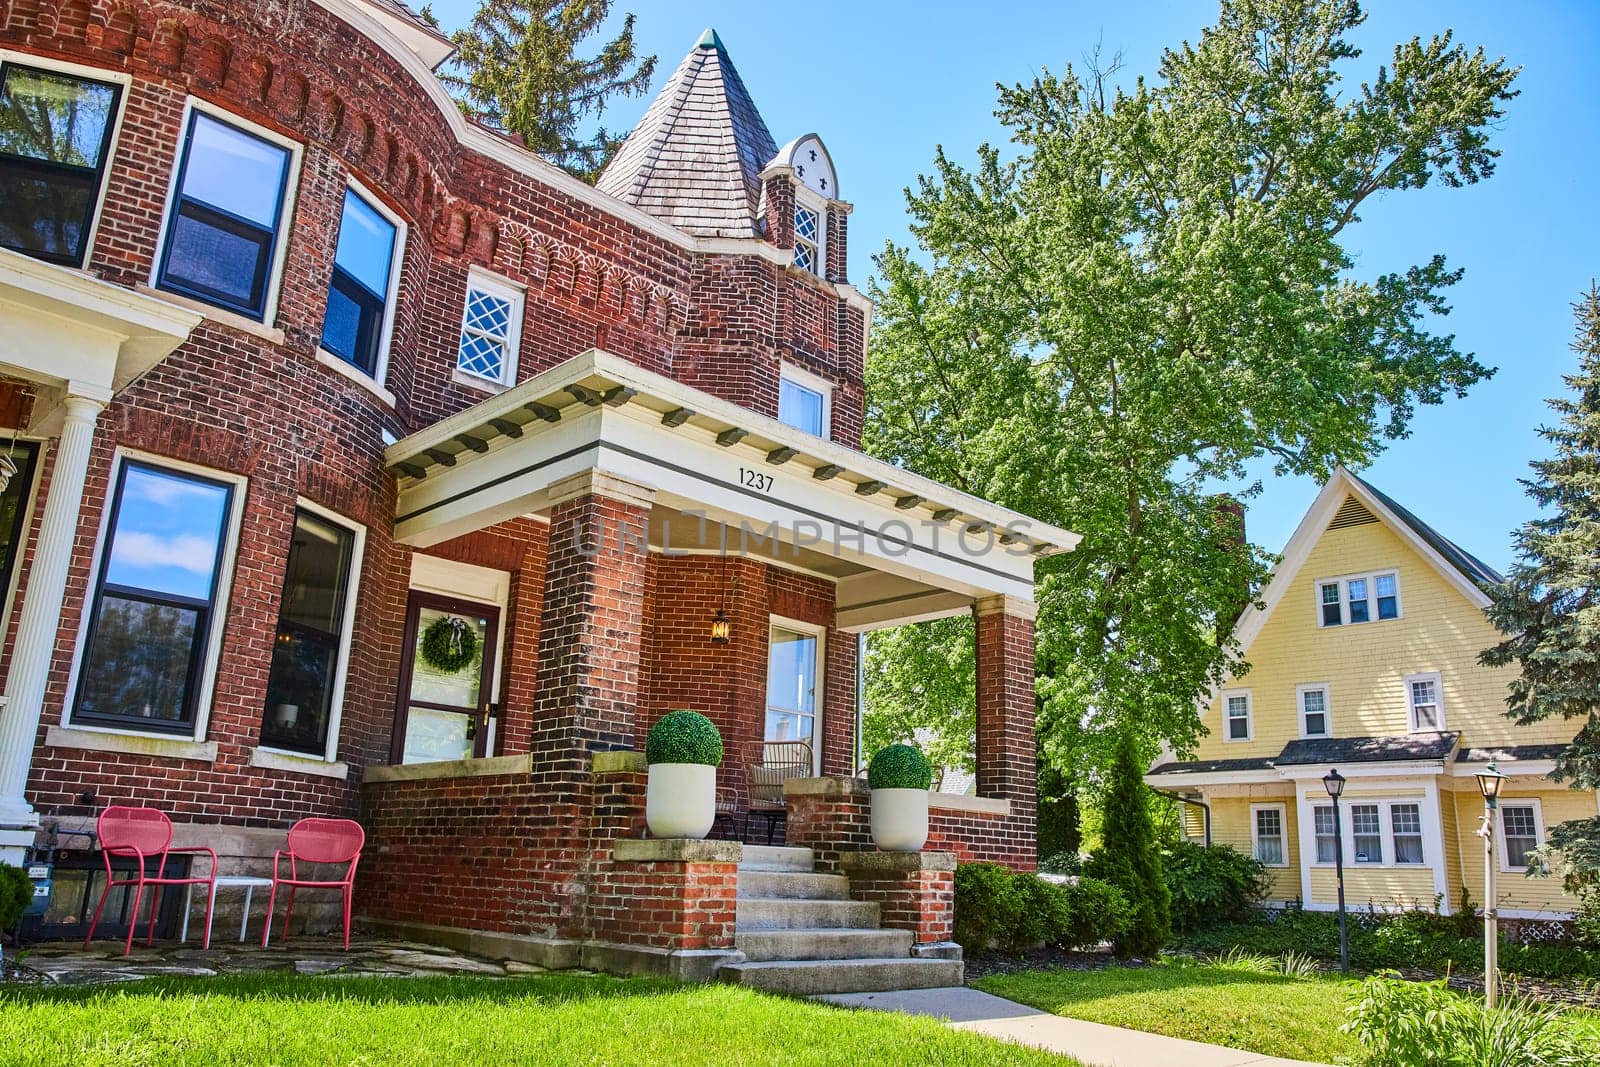 Elegant red brick Victorian-Colonial house in Fort Wayne, Indiana, showcasing historic suburban charm.